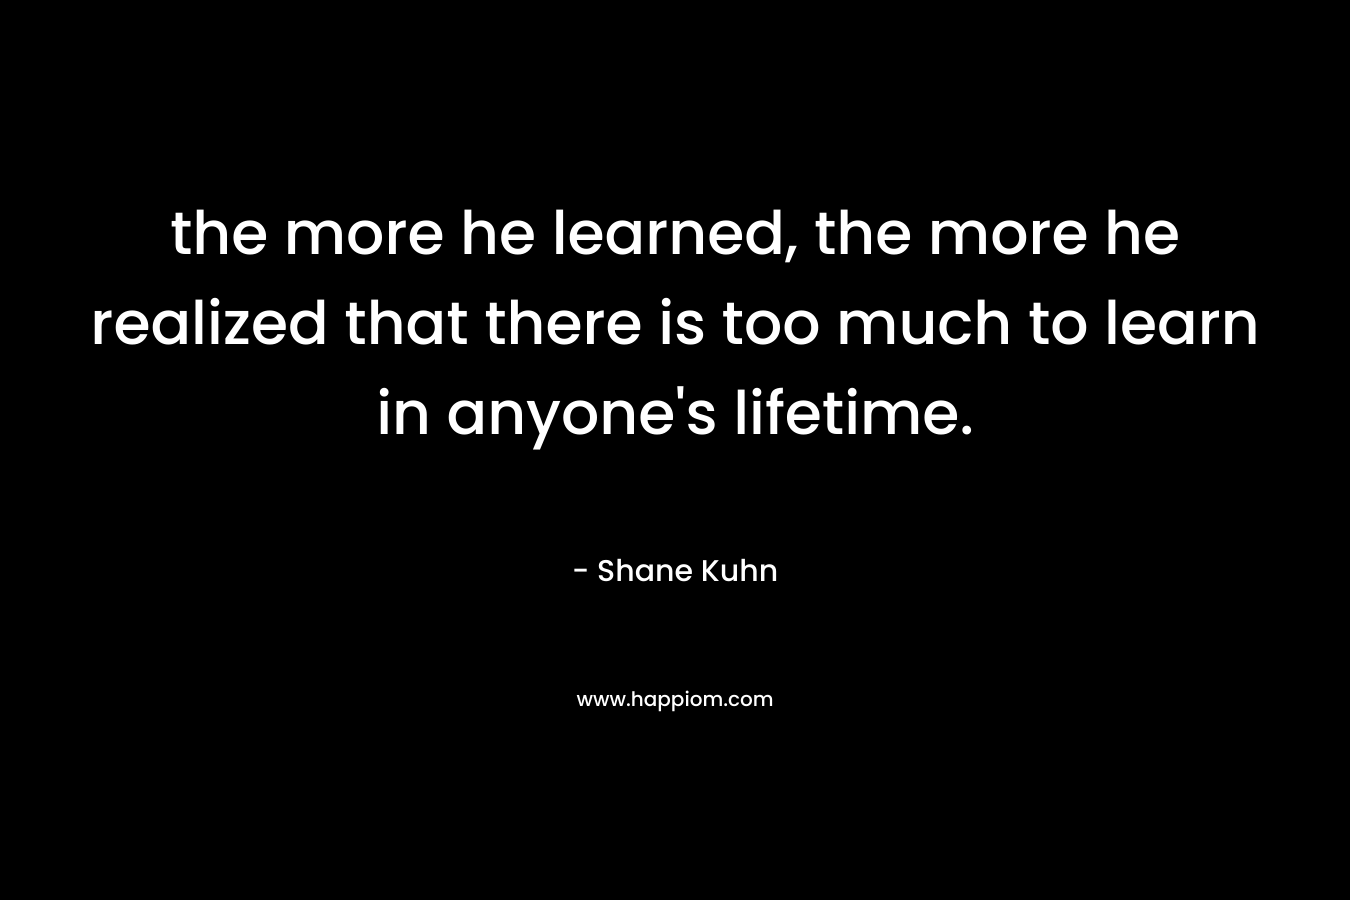 the more he learned, the more he realized that there is too much to learn in anyone’s lifetime. – Shane Kuhn